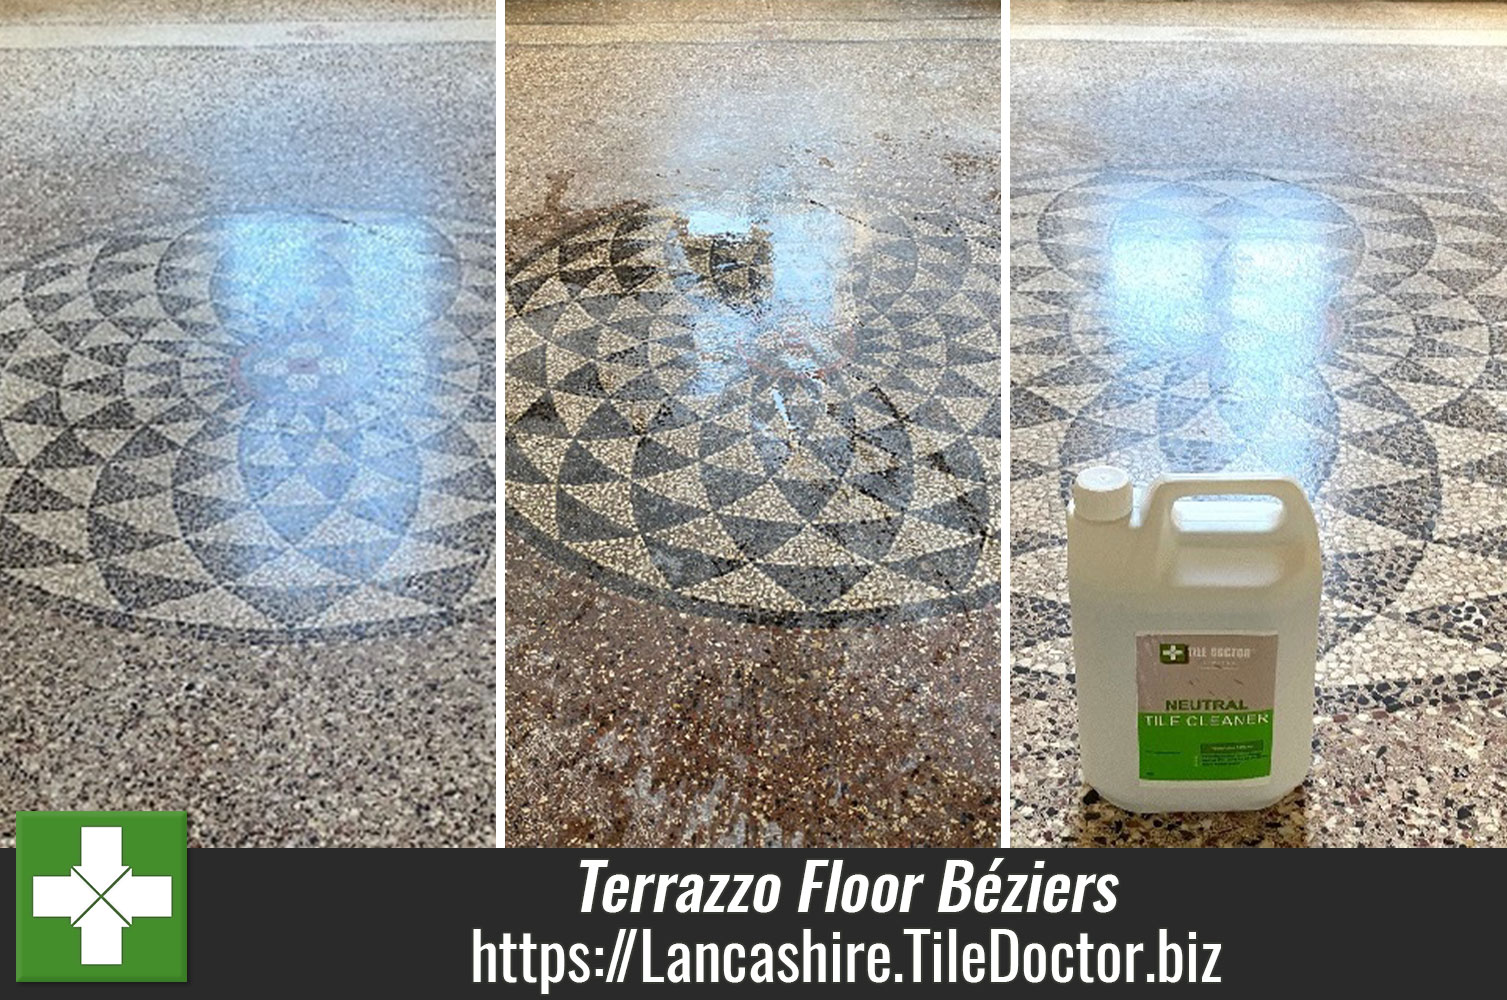 Tile Doctor Burnishing Pads Exported to the South of France for a Terrazzo Floor Renovation Project